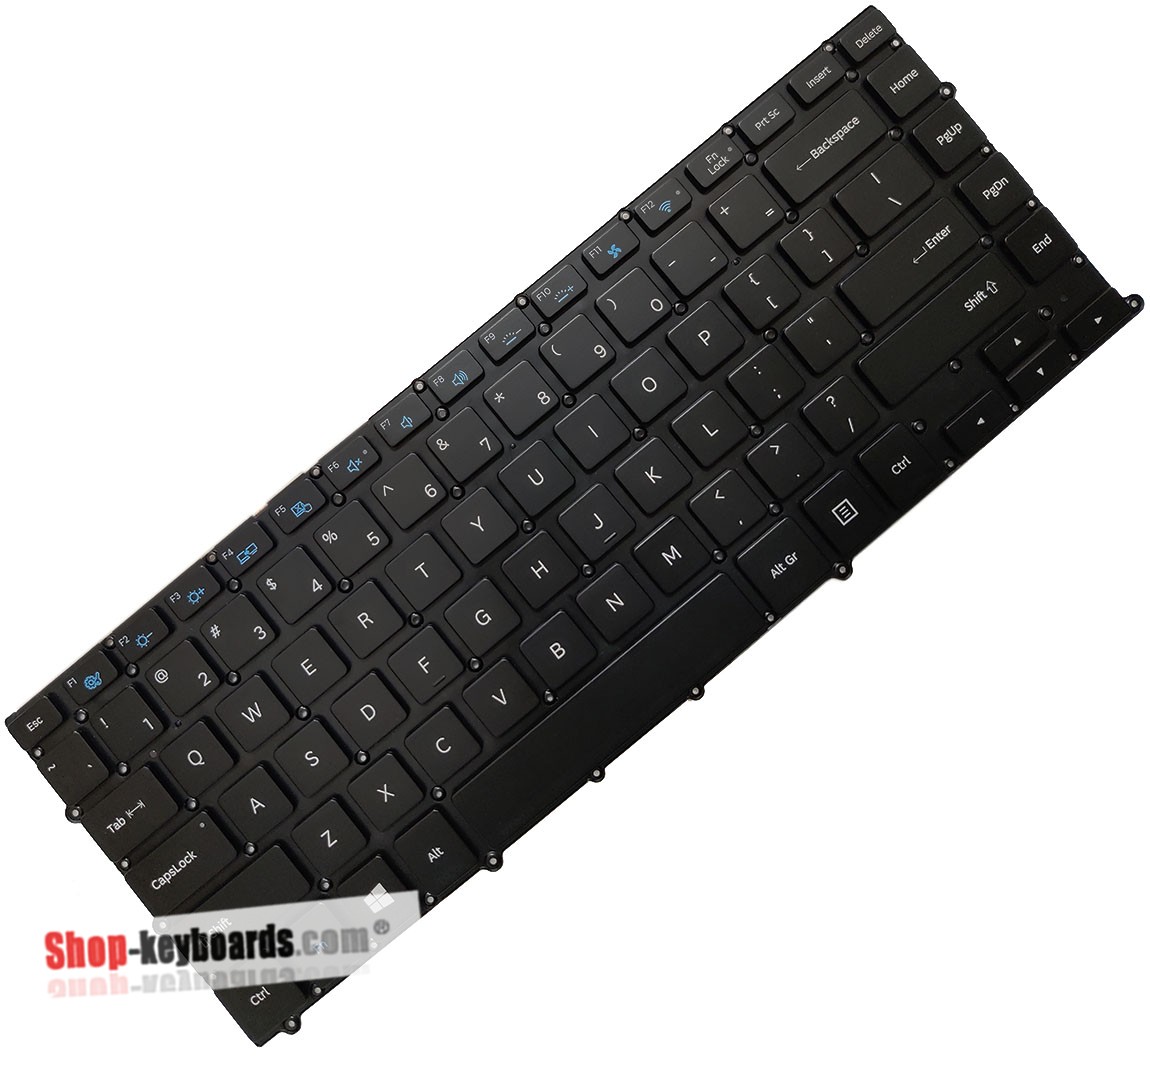 Samsung NP900X4F Keyboard replacement